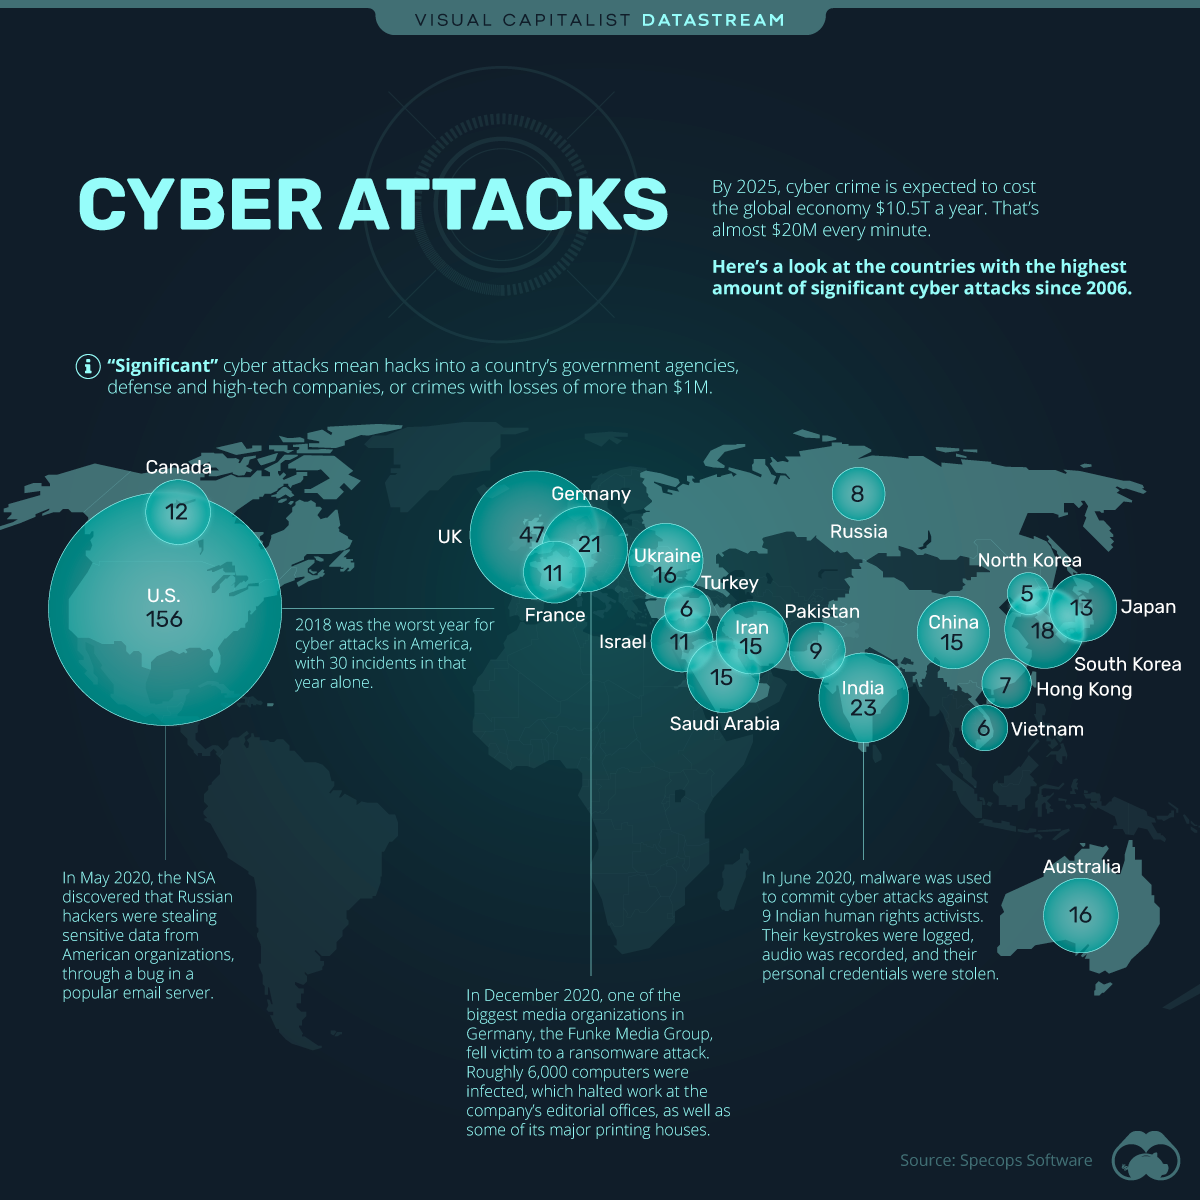 Significant Cyber Attacks